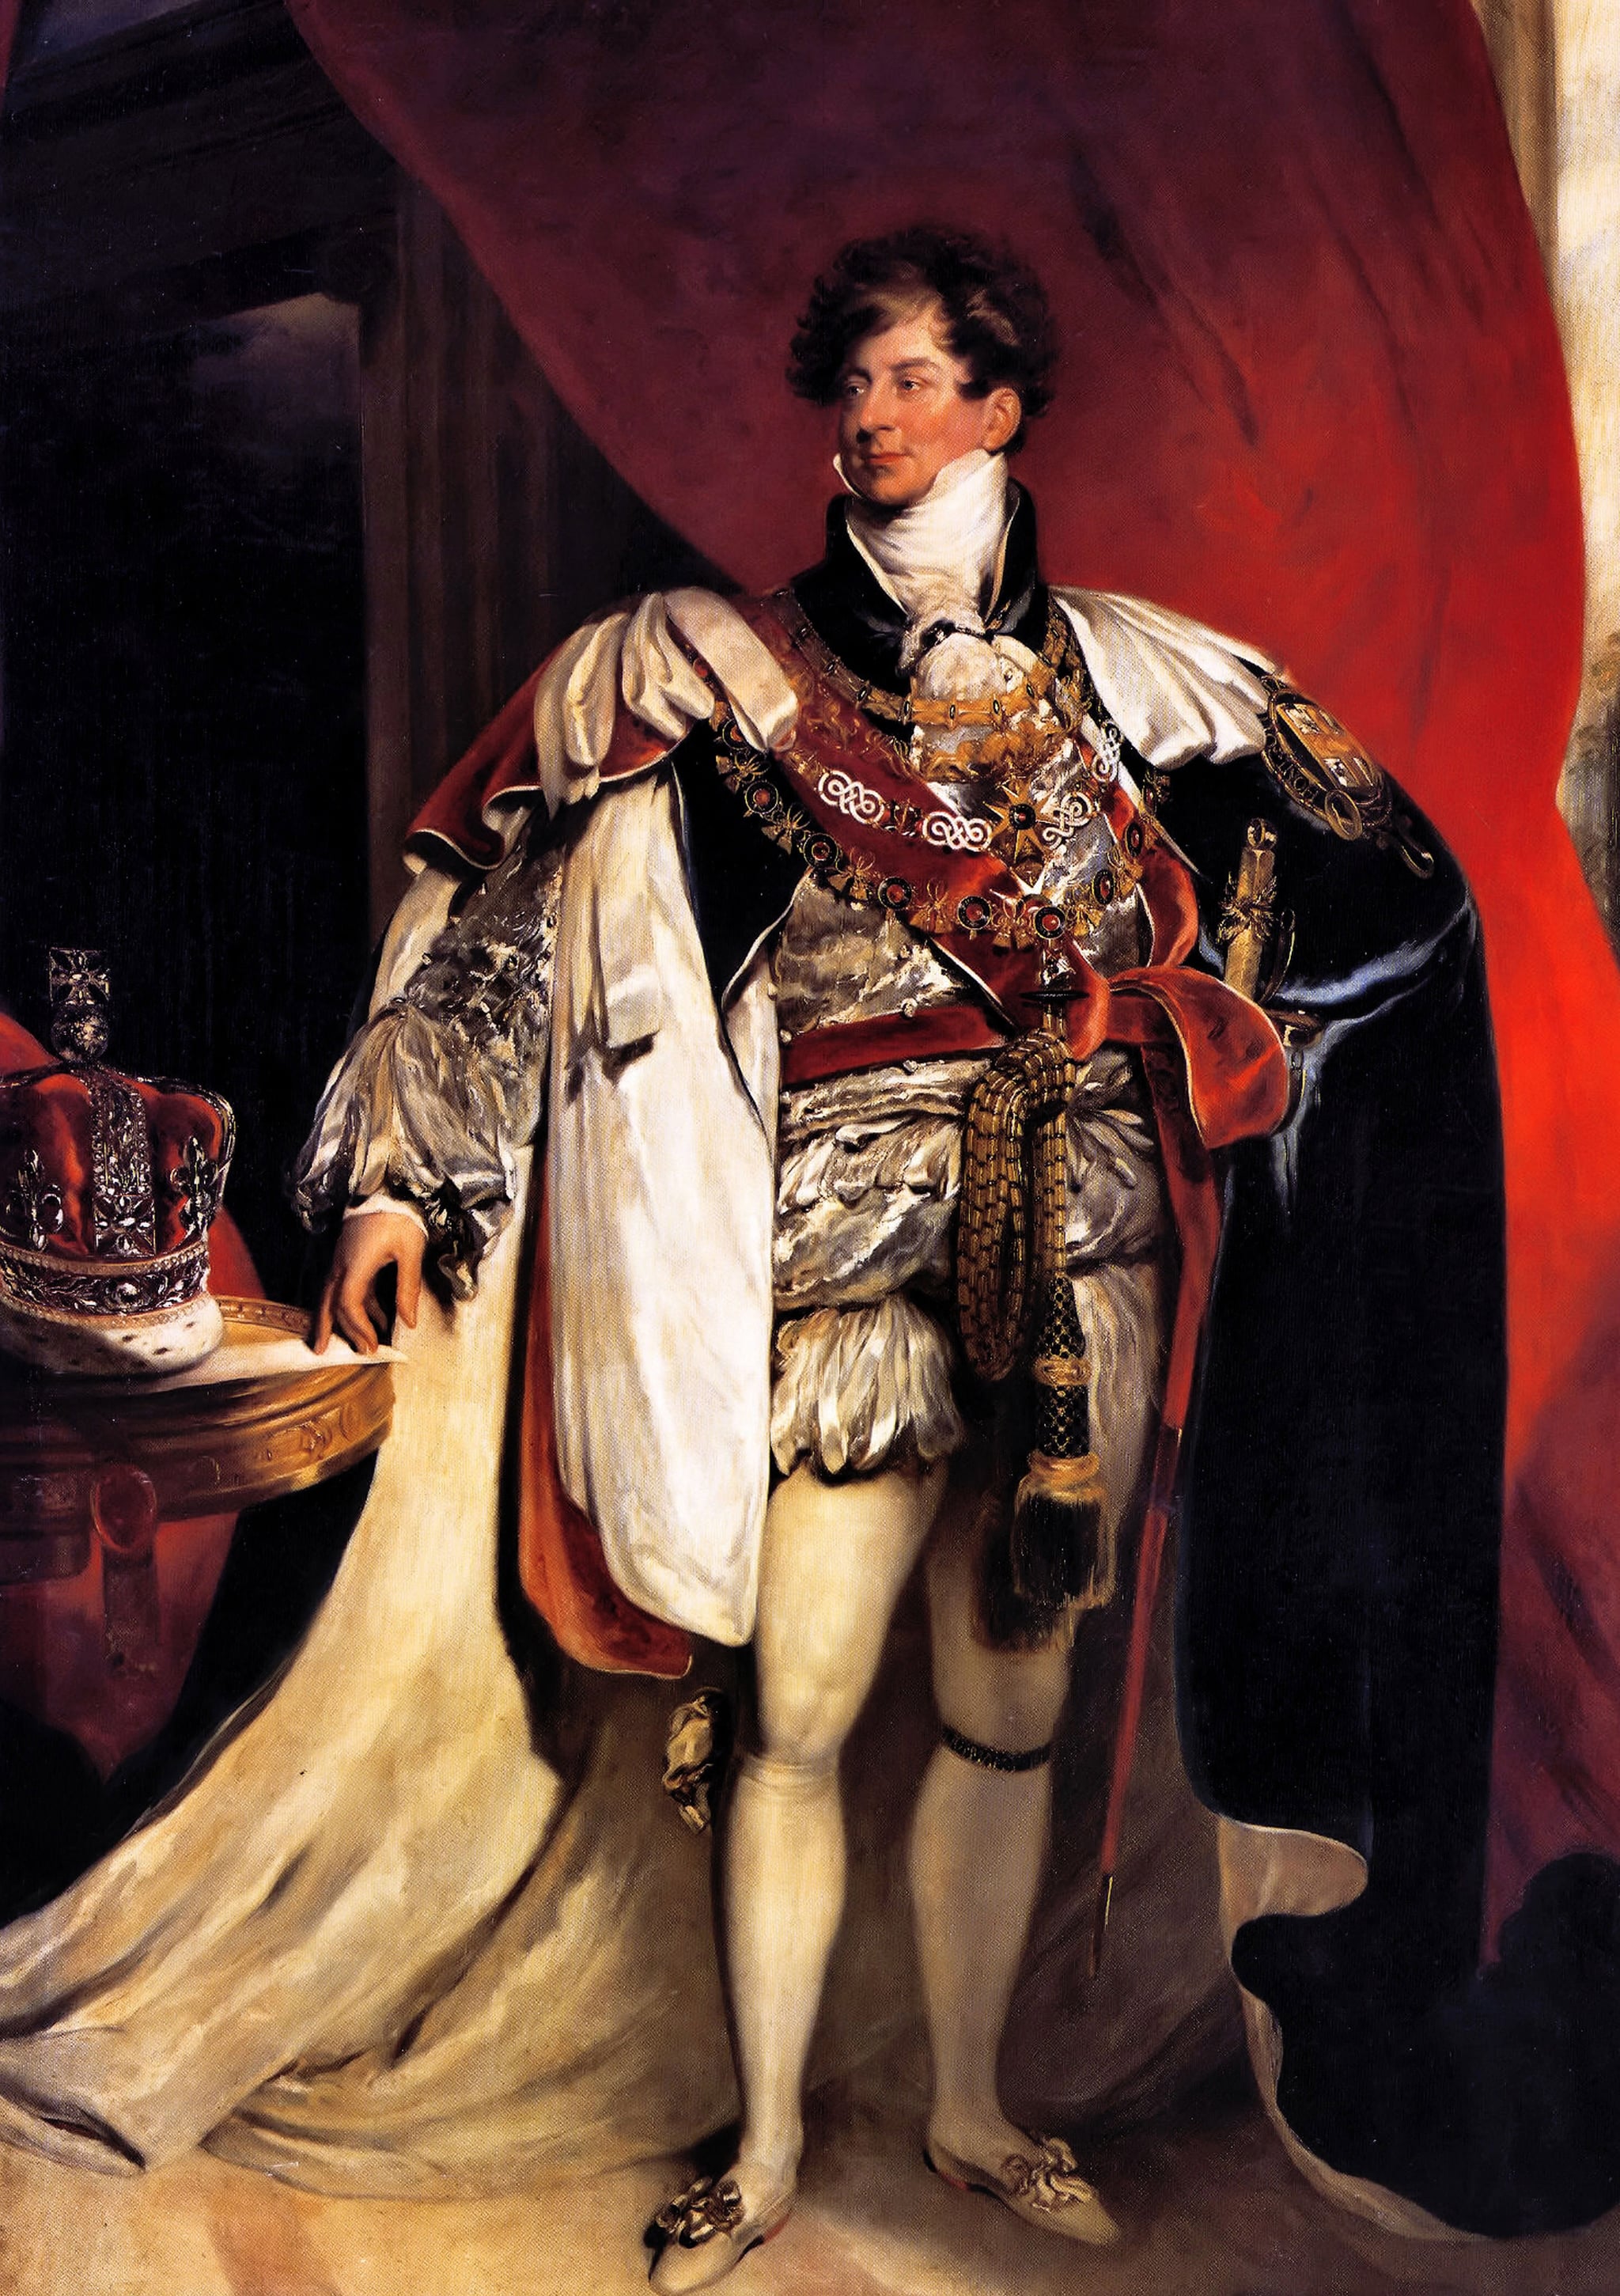 George IV 1762 - 1830, King of Great Britain 1820 - 1830. Portrait as Prince Regent by Thomas Lawrence 1822 (Photo by Universal History Archive/Getty Images)